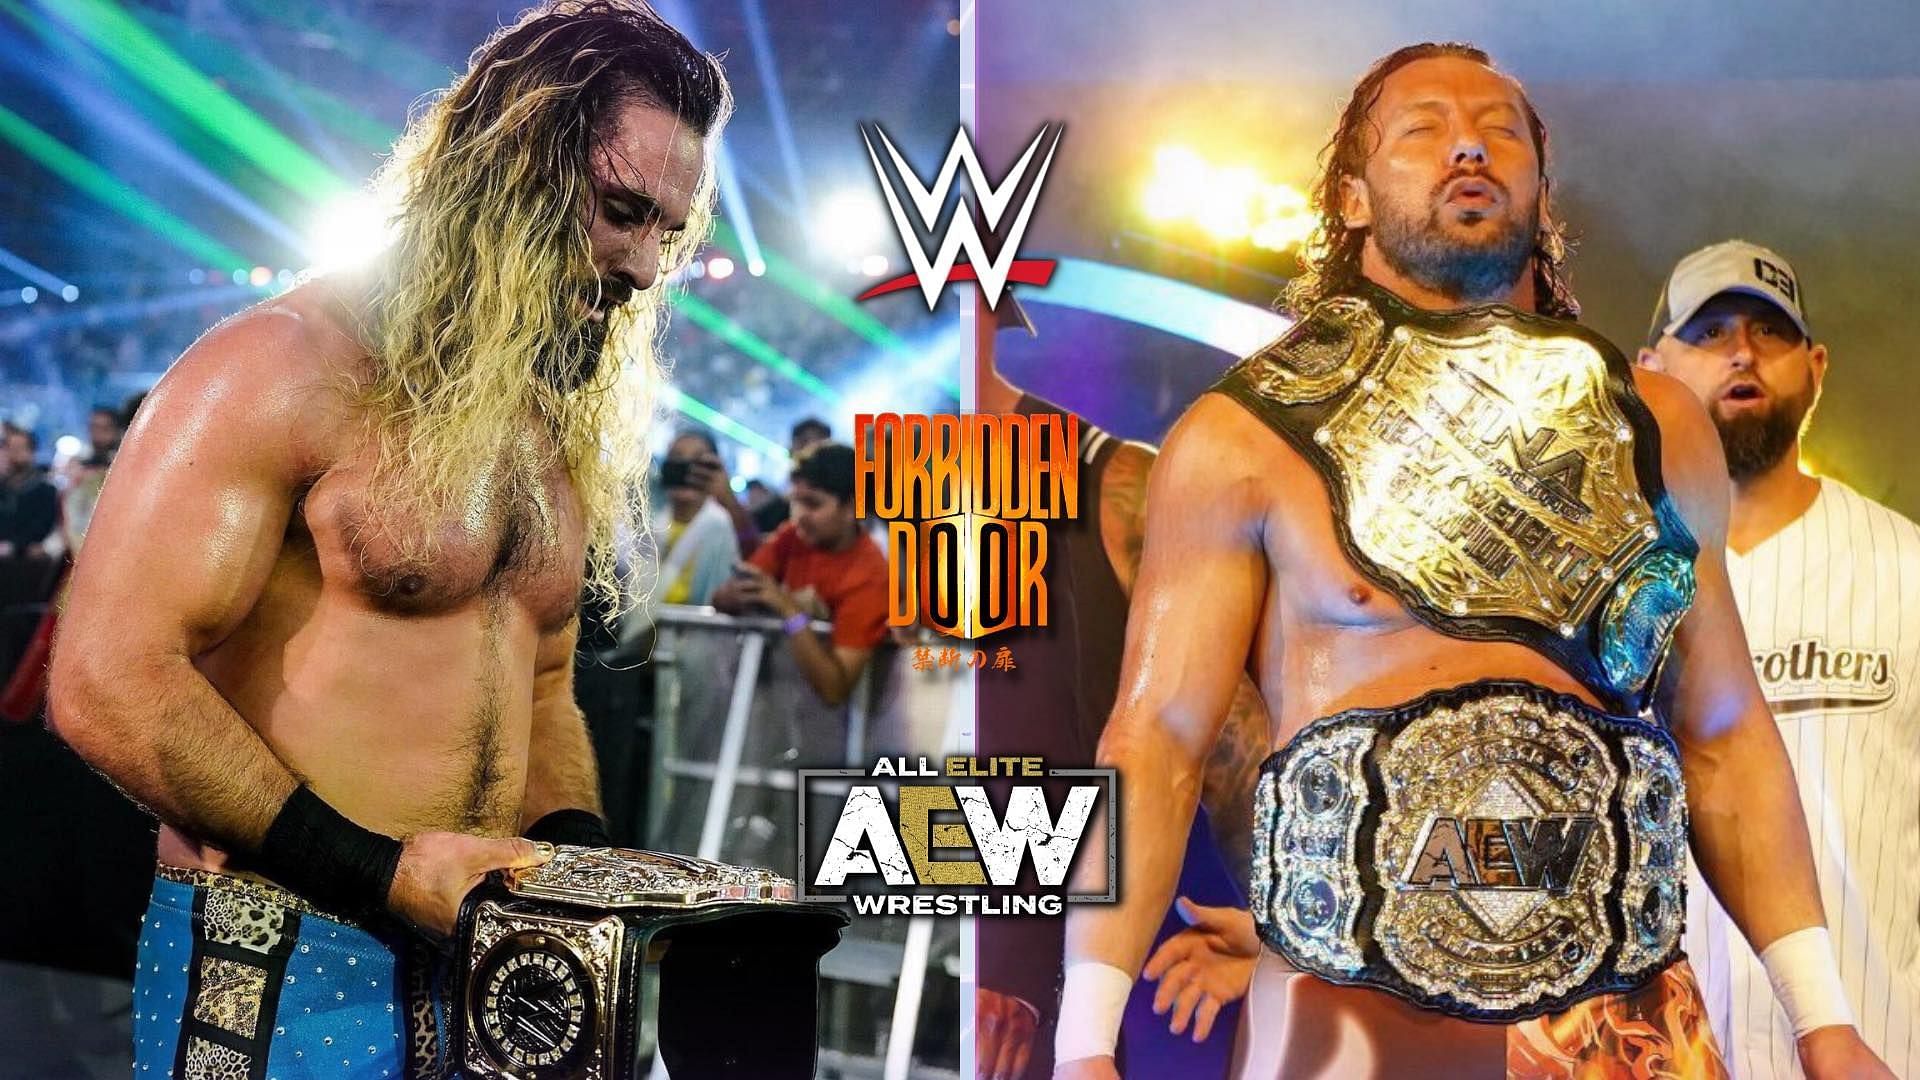 Would AEW and WWE ever collaborate to hold their own Forbidden Door event?